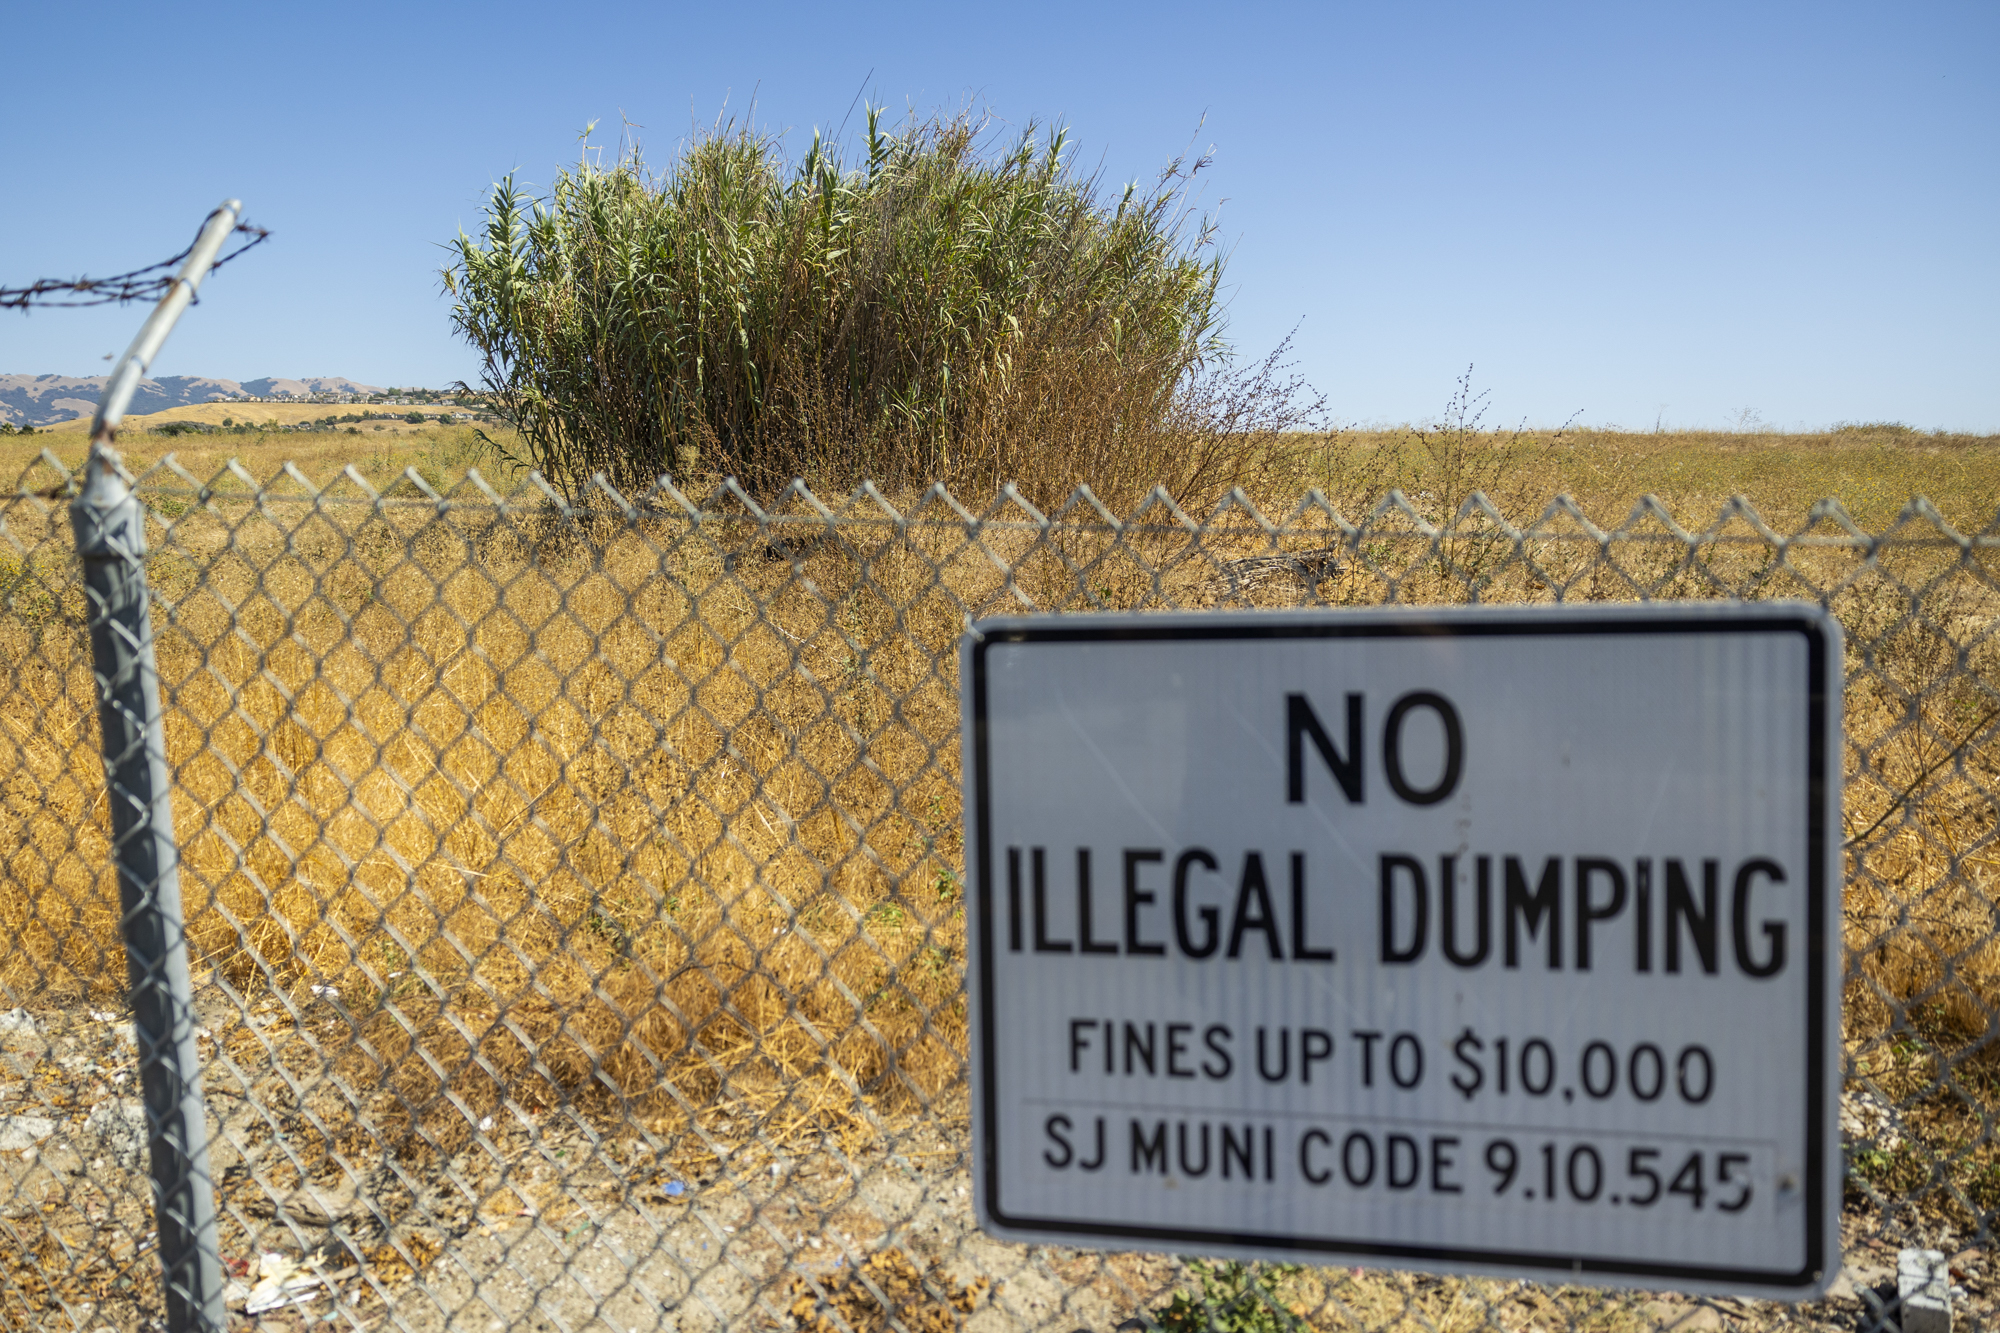 A sign on a chain link fence reading "No Illegal Dumping" in front of a large open field.